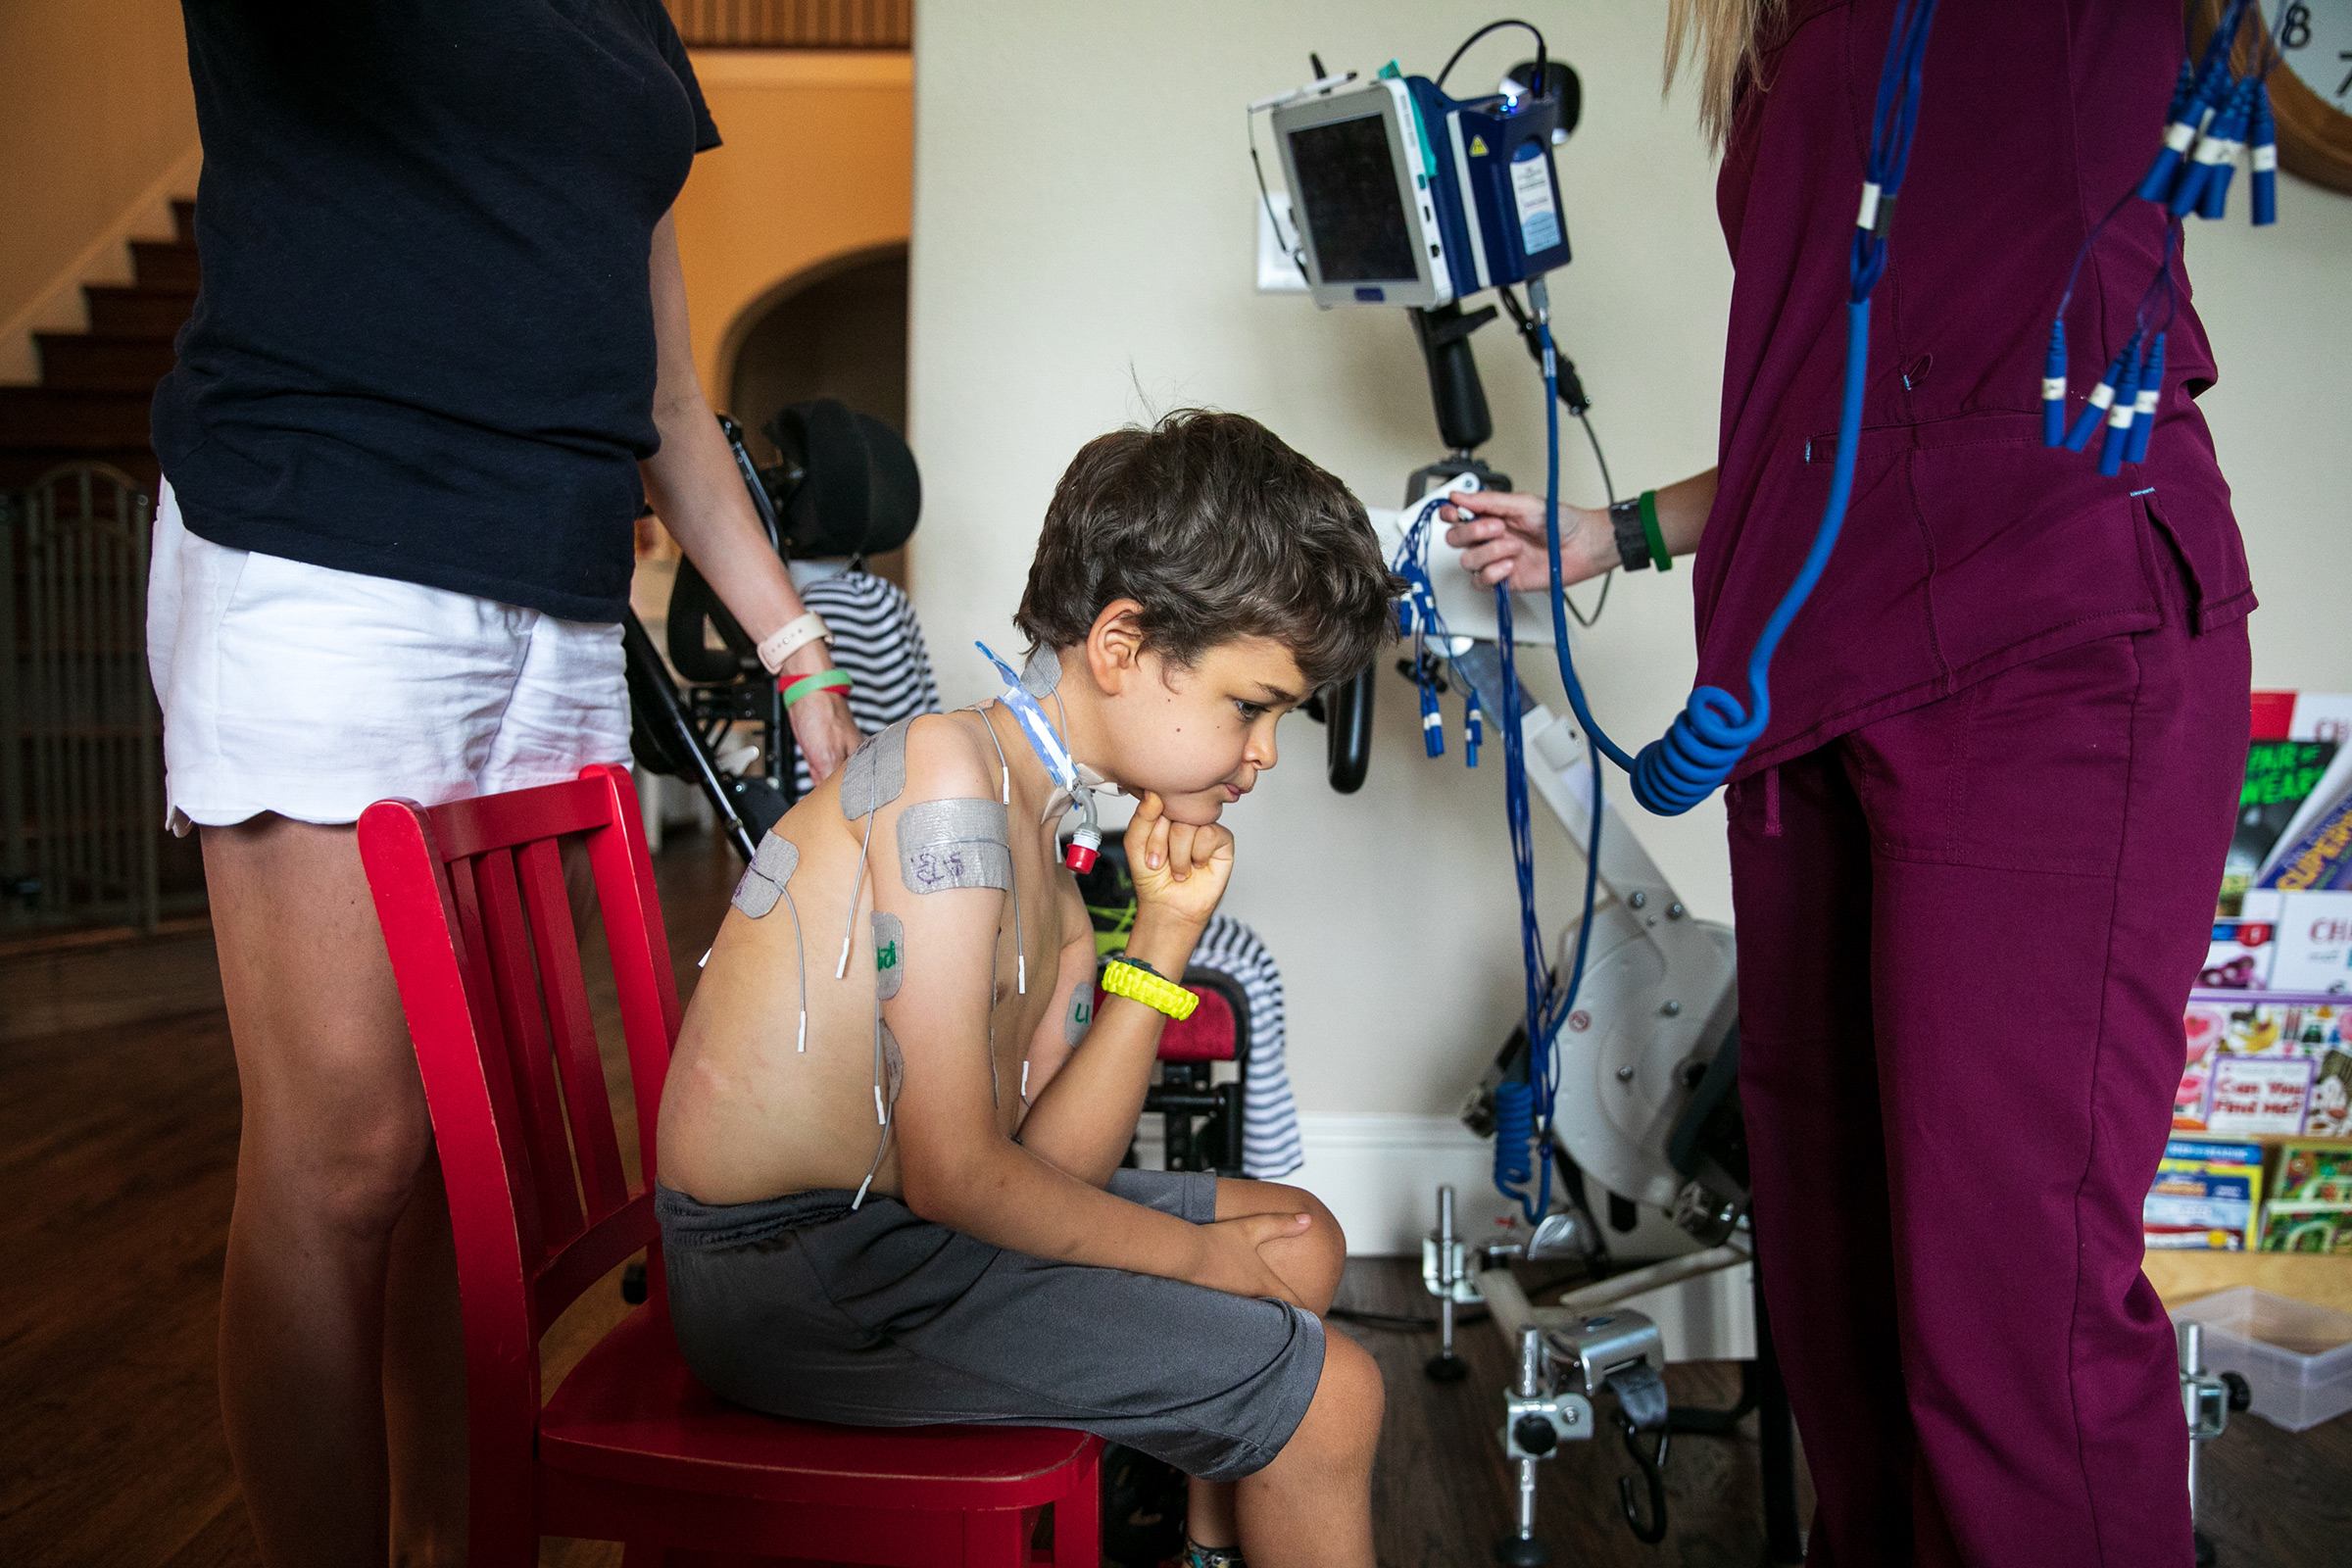 Braden's nurse and mother set him up for treatment. (Ilana Panich-Linsman for TIME)